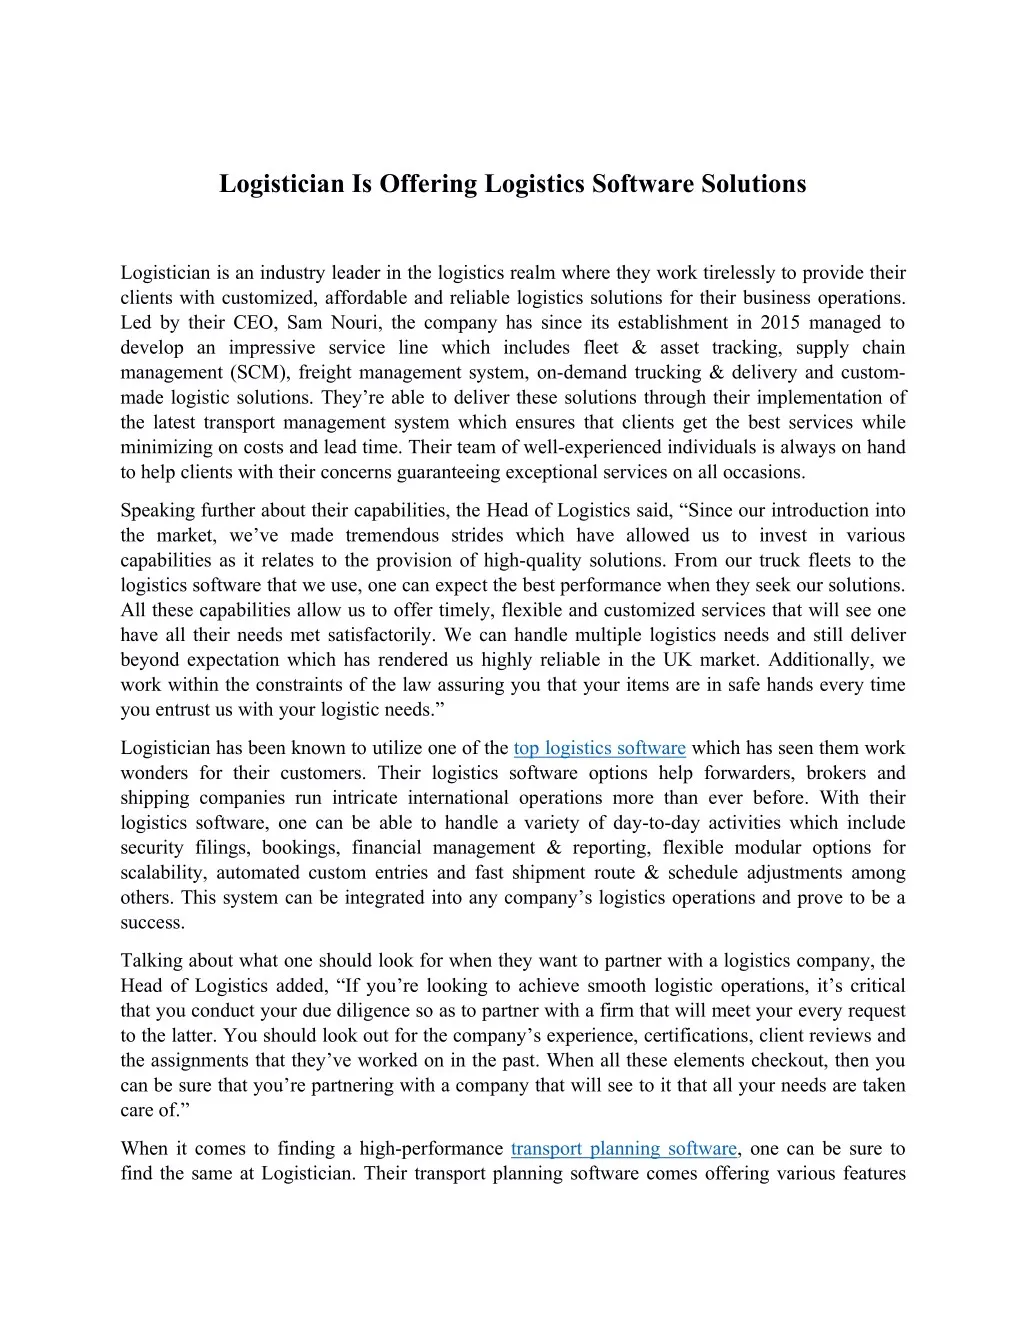 logistician is offering logistics software